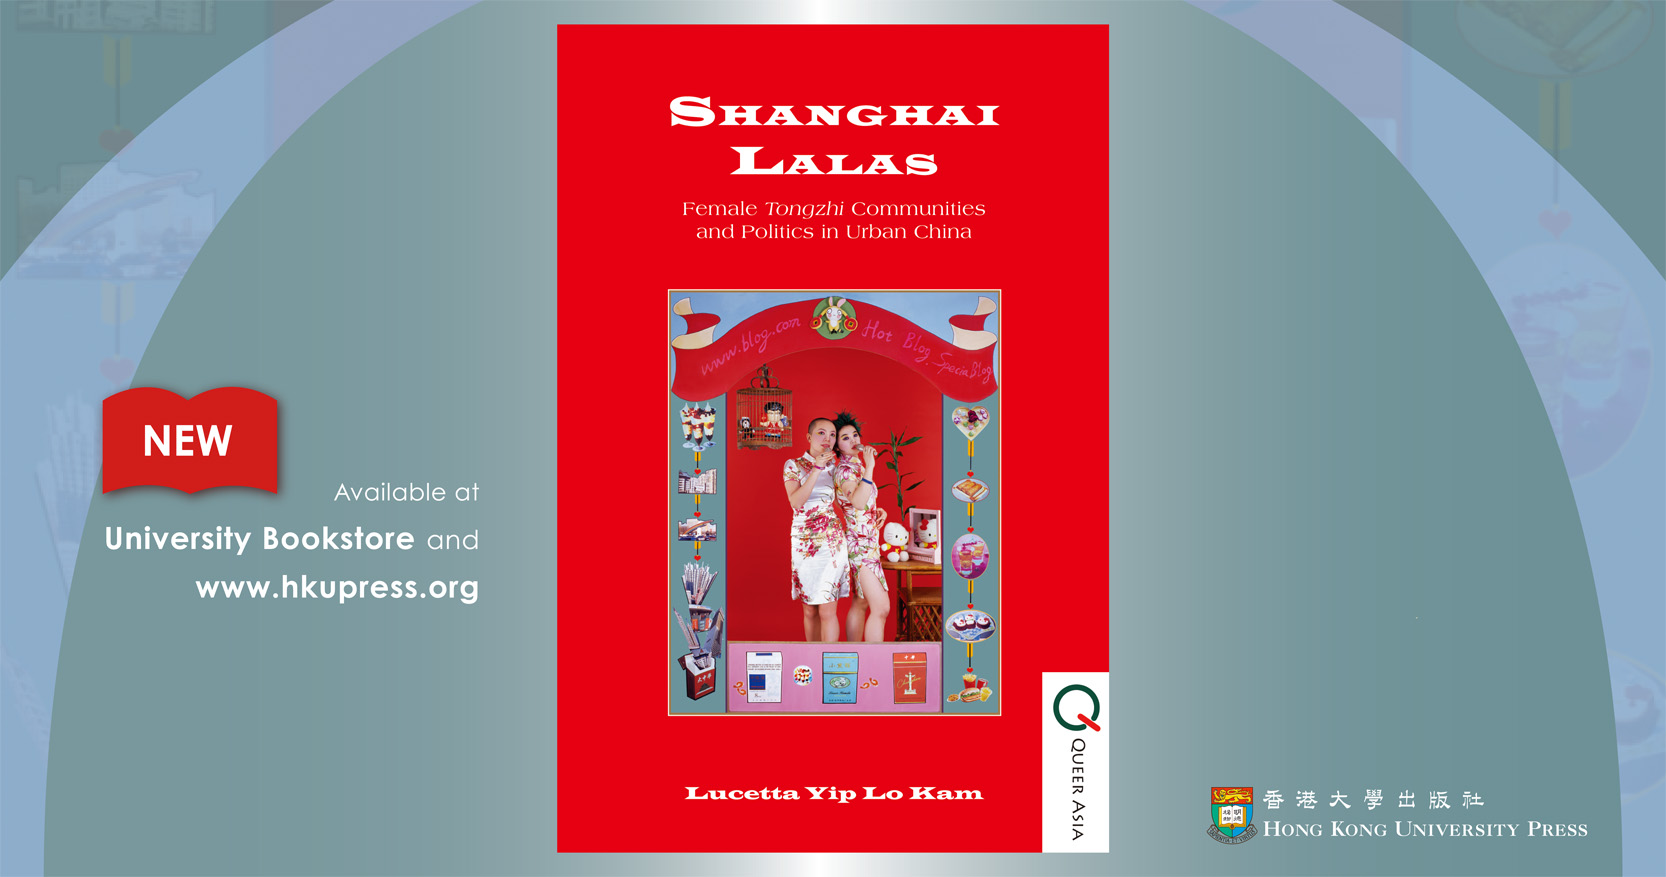 This is the first ethnographic study of lala (lesbian, bisexual, and transgender) communities and politics in China, focusing on the city of Shanghai.